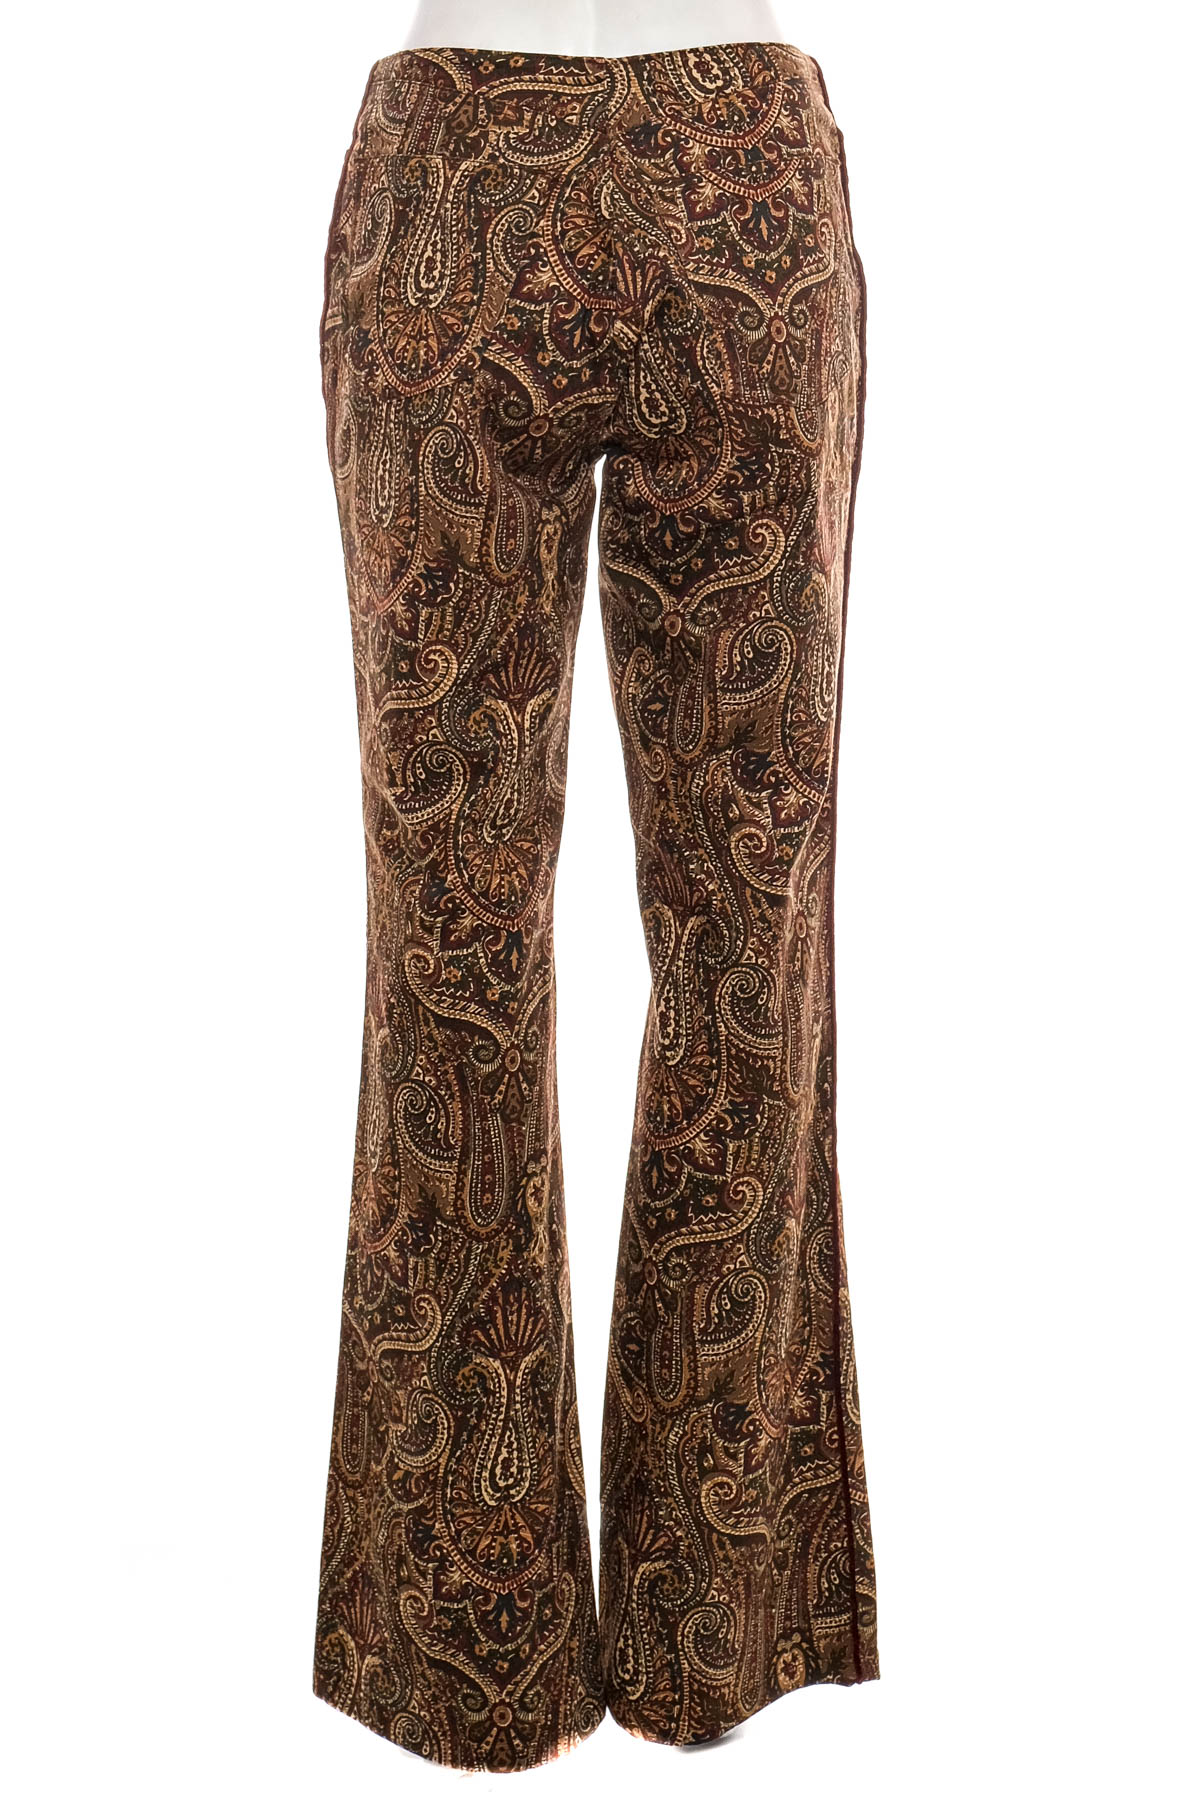 Women's trousers - Cambio Jeans - 1